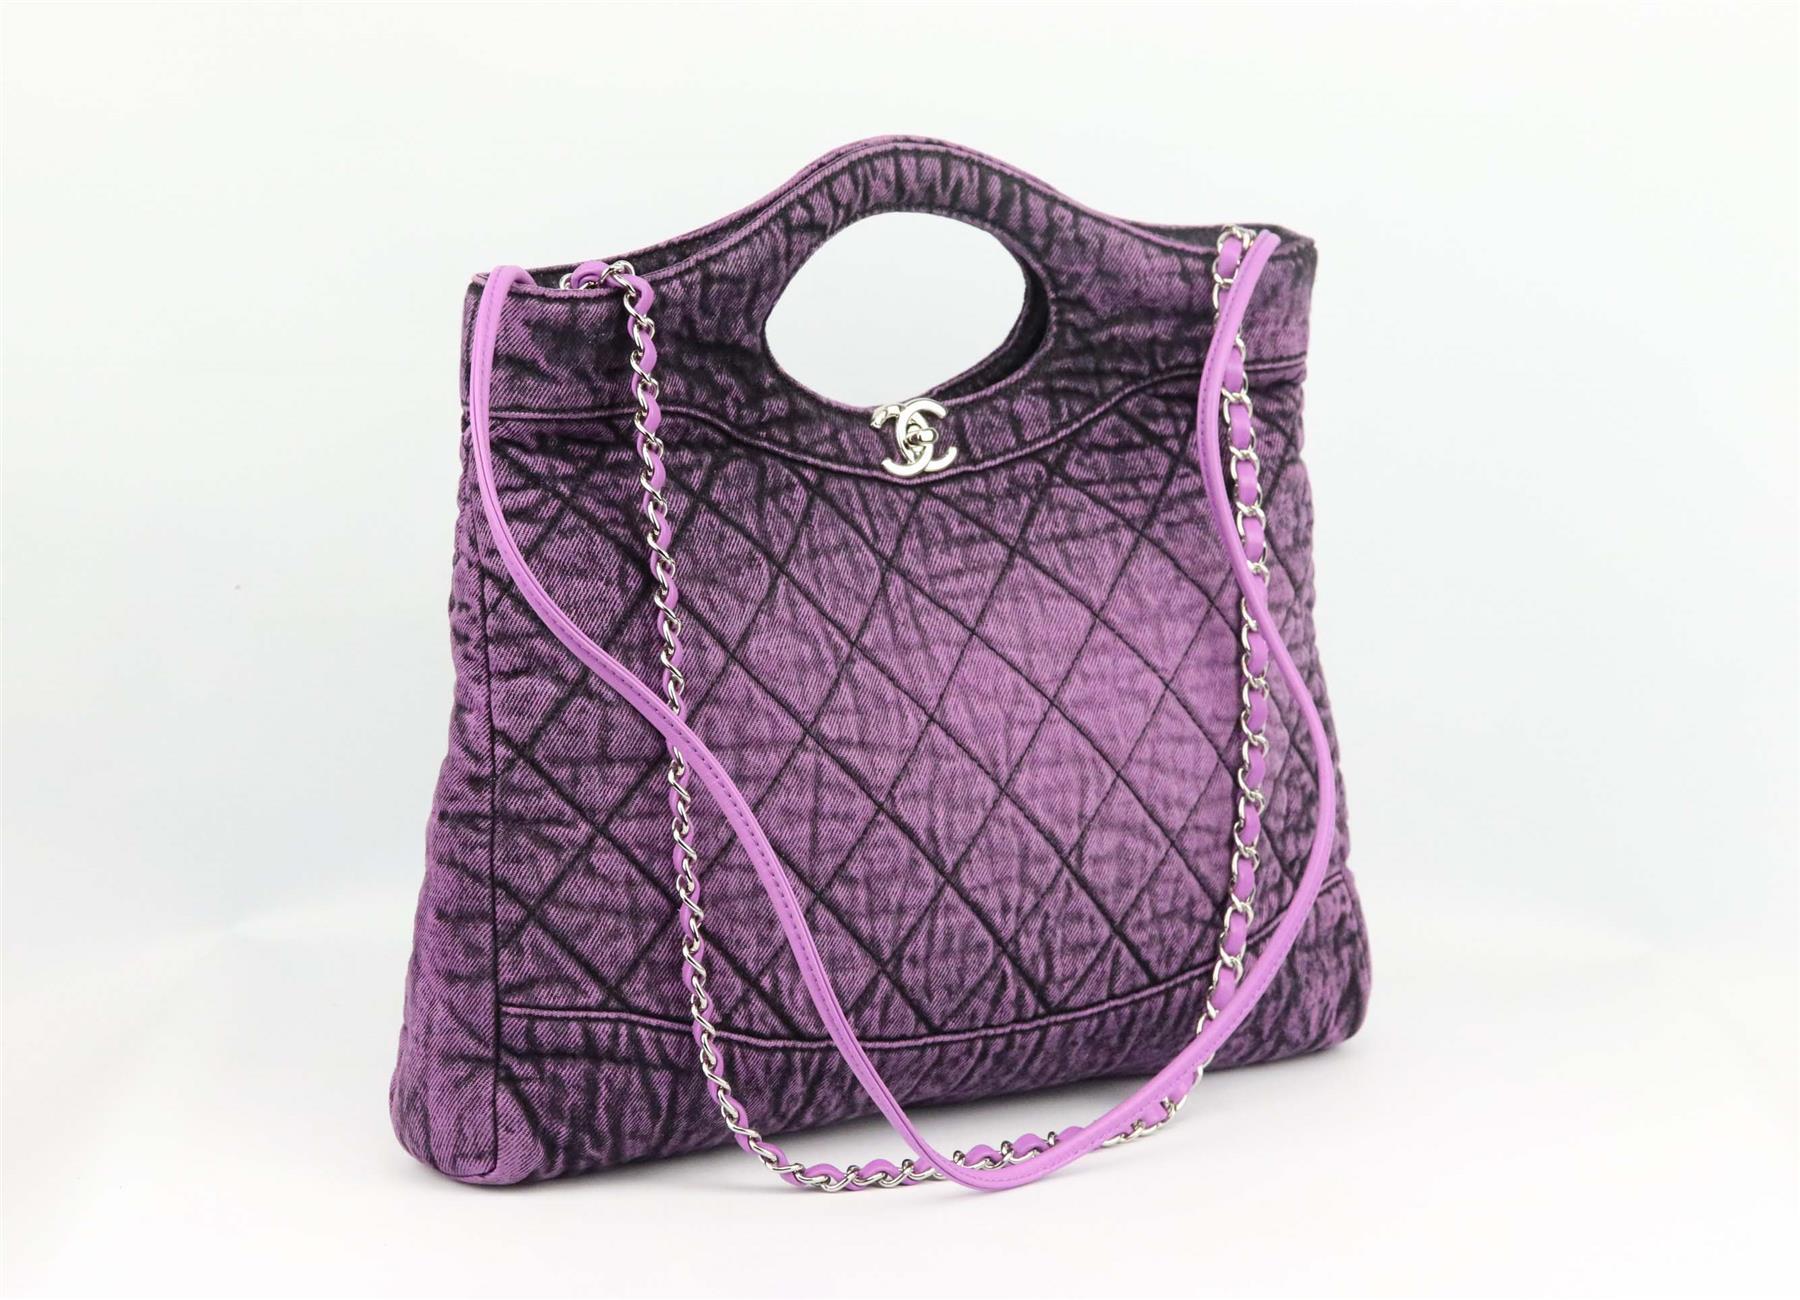 Made in Italy, this beautiful 2020 Chanel ‘Denimpression’ tote bag has been made from quilted washed-denim and soft purple calfskin leather exterior, this piece is decorated with a logo CC detail on the front and finished with silver-tone chain and